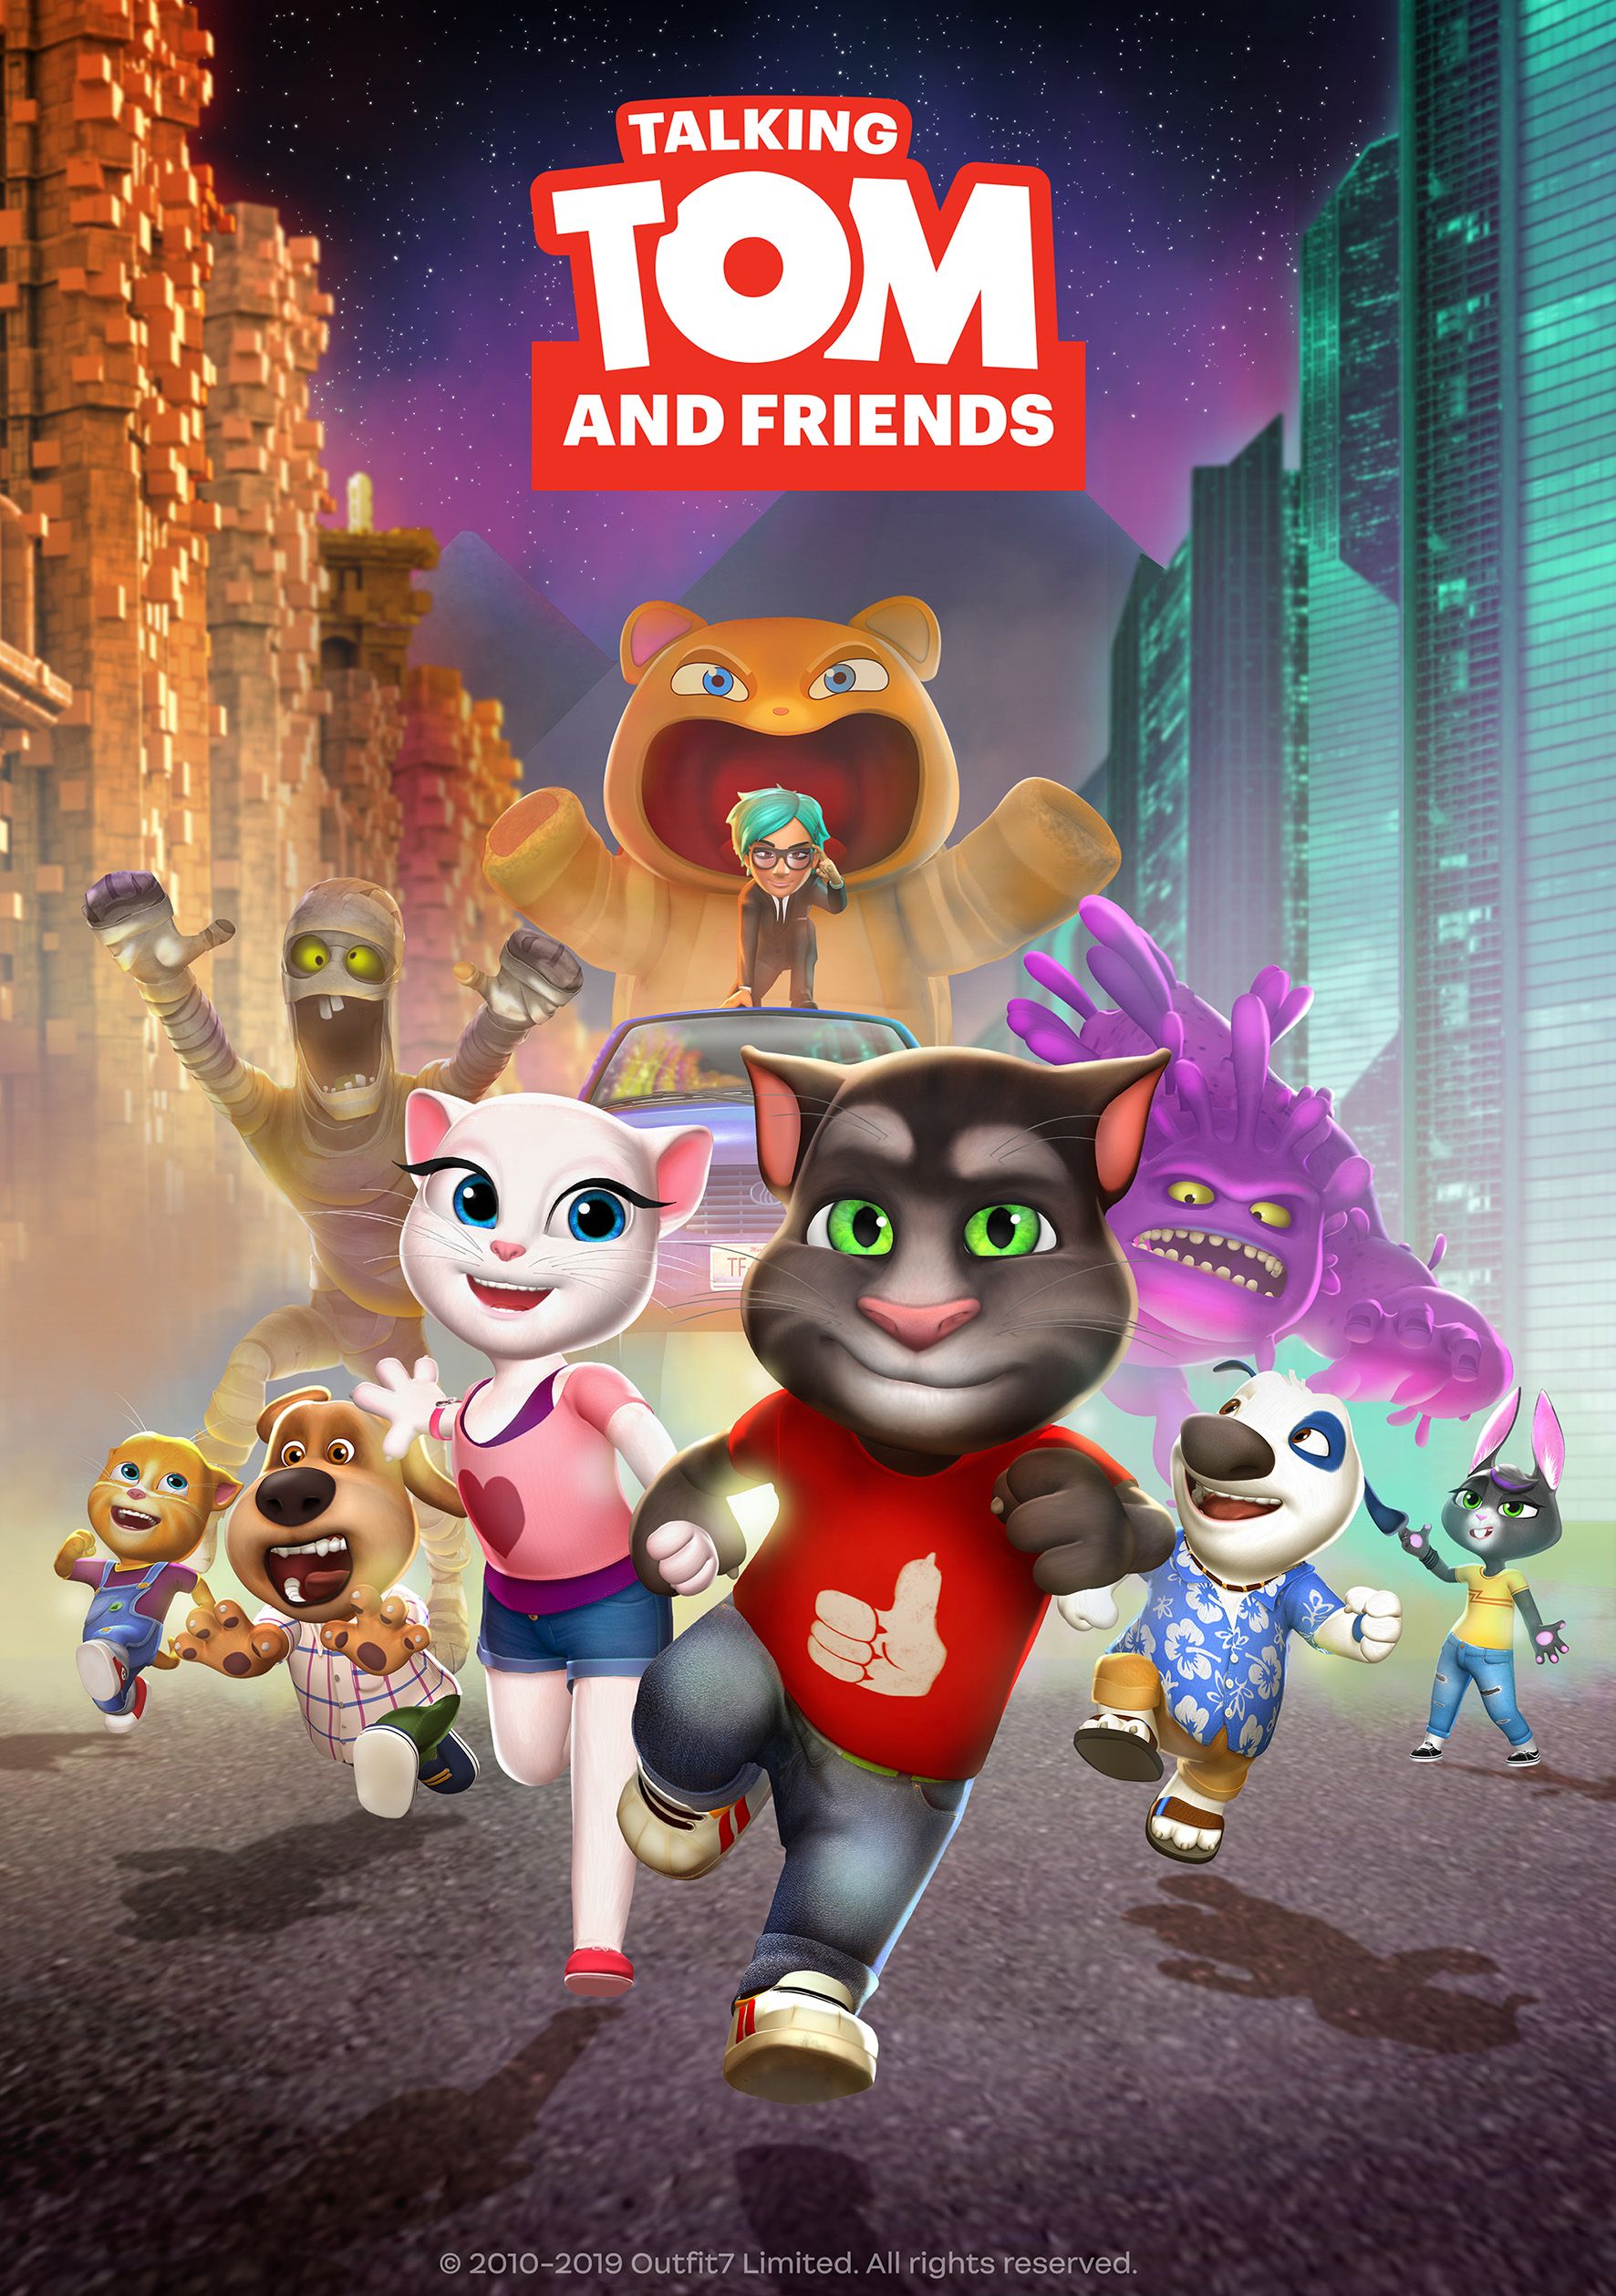 Talking Tom and Friends (TV Series 2014– )